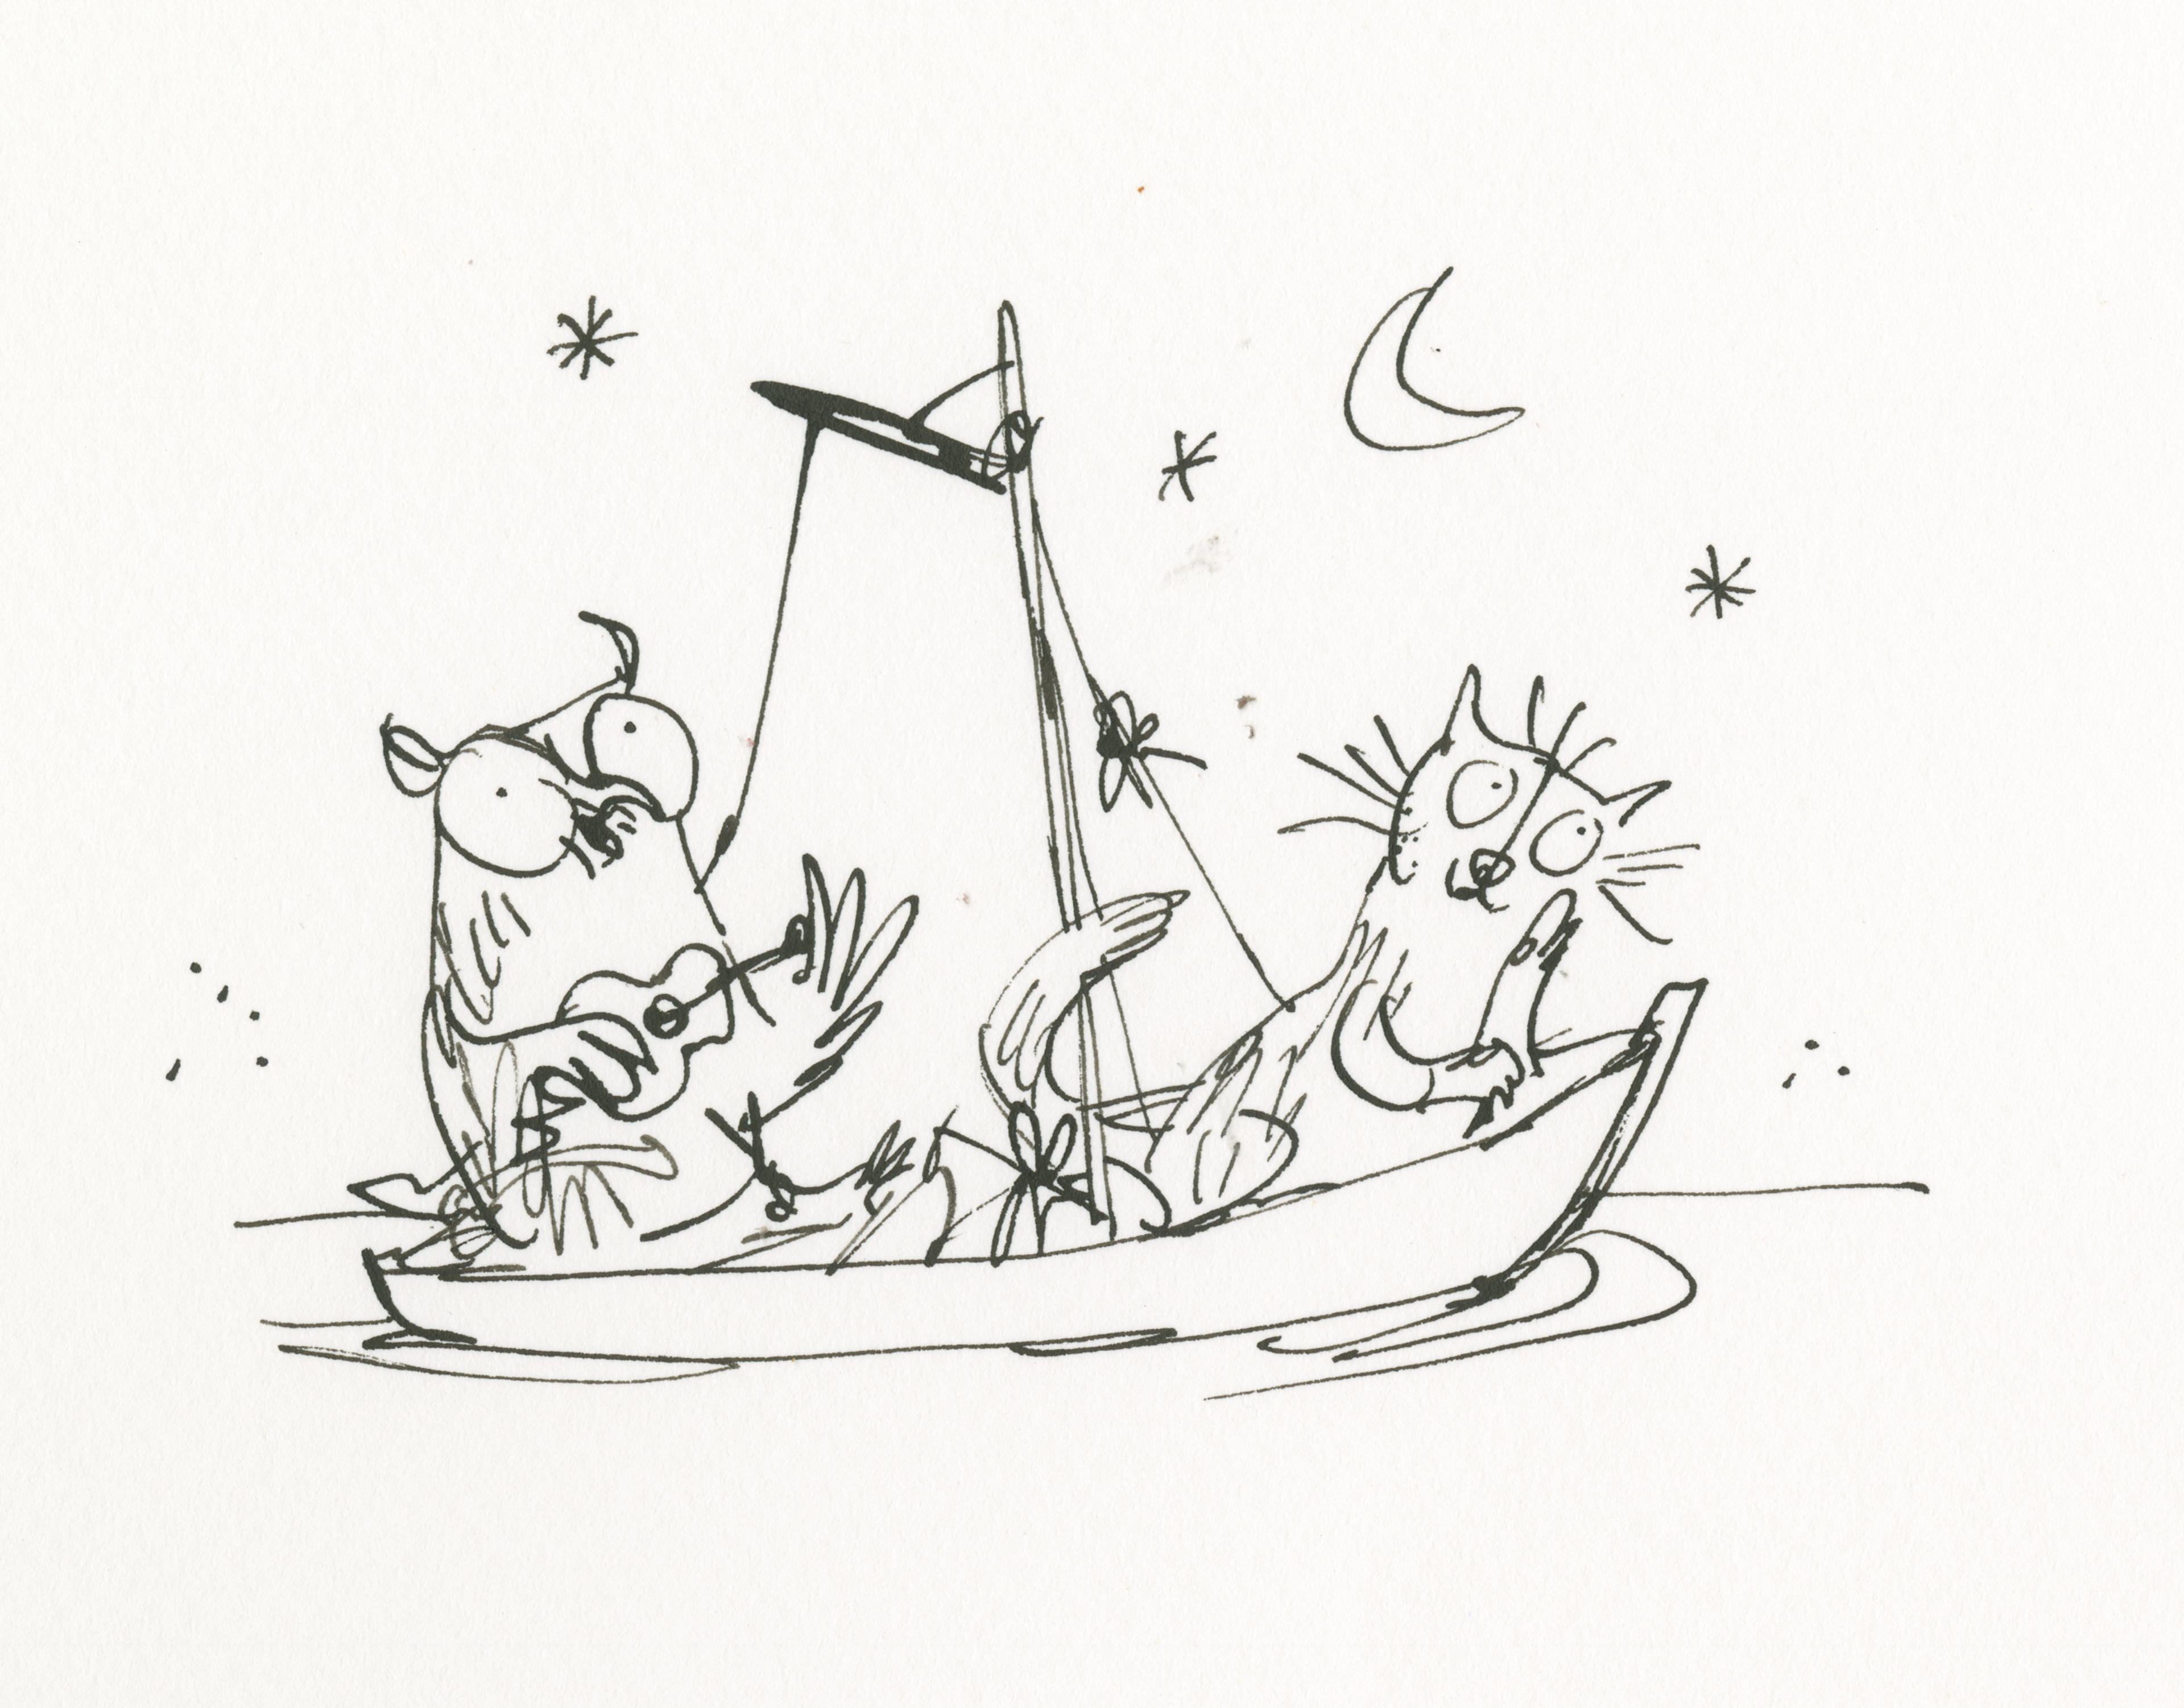 Line drawing of a guitar-playing owl and a cat in a sailing boat under moon and stars